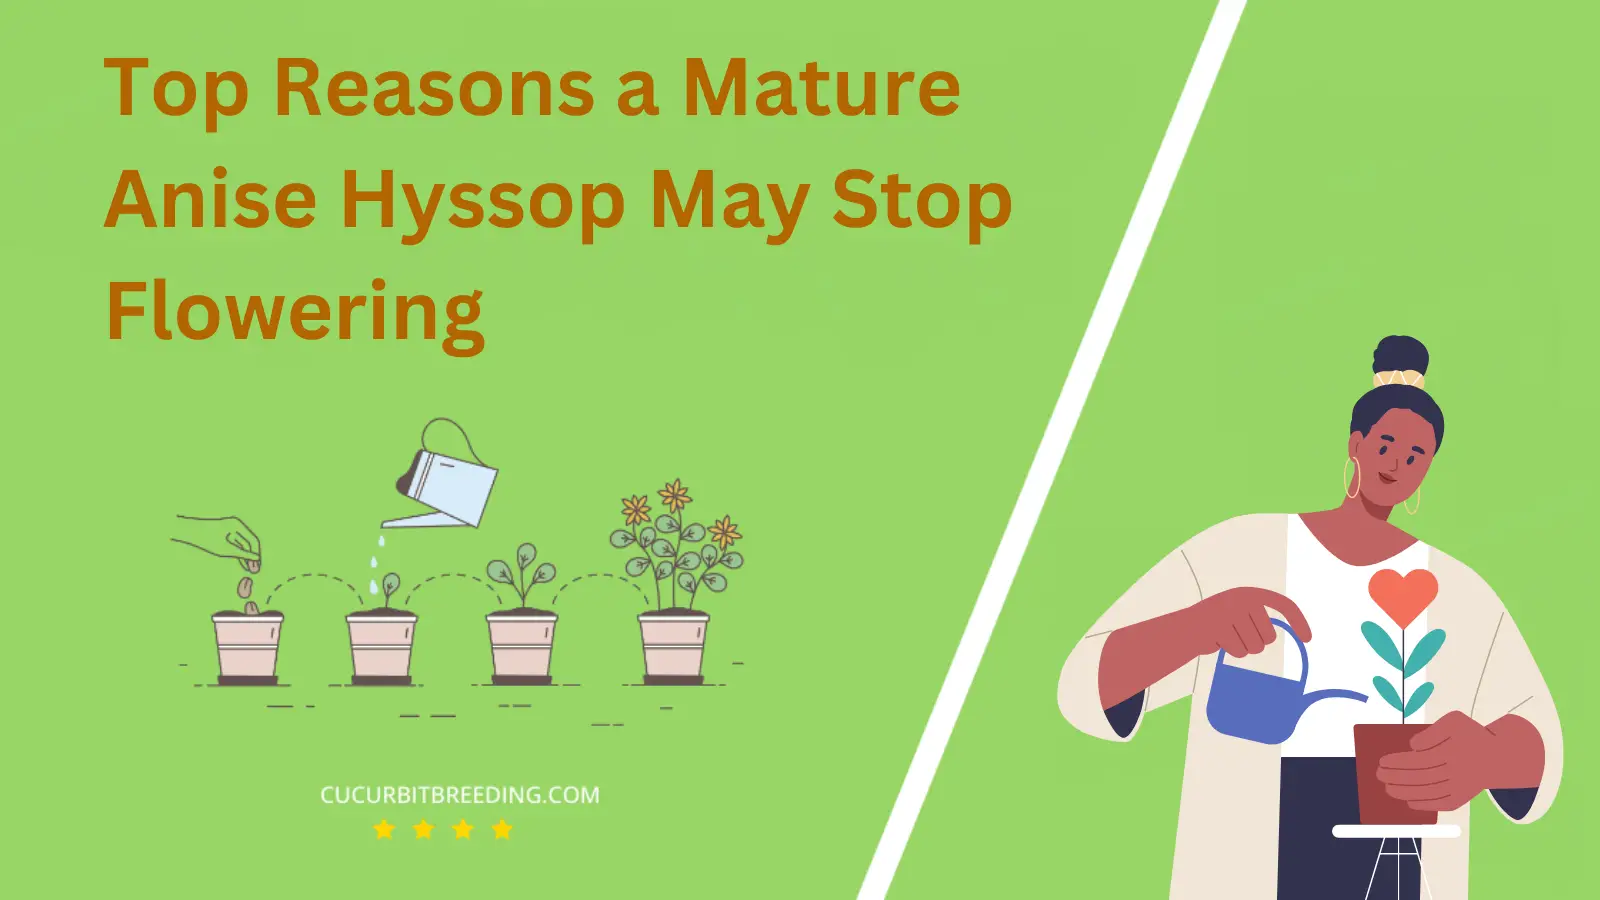 Top Reasons a Mature Anise Hyssop May Stop Flowering